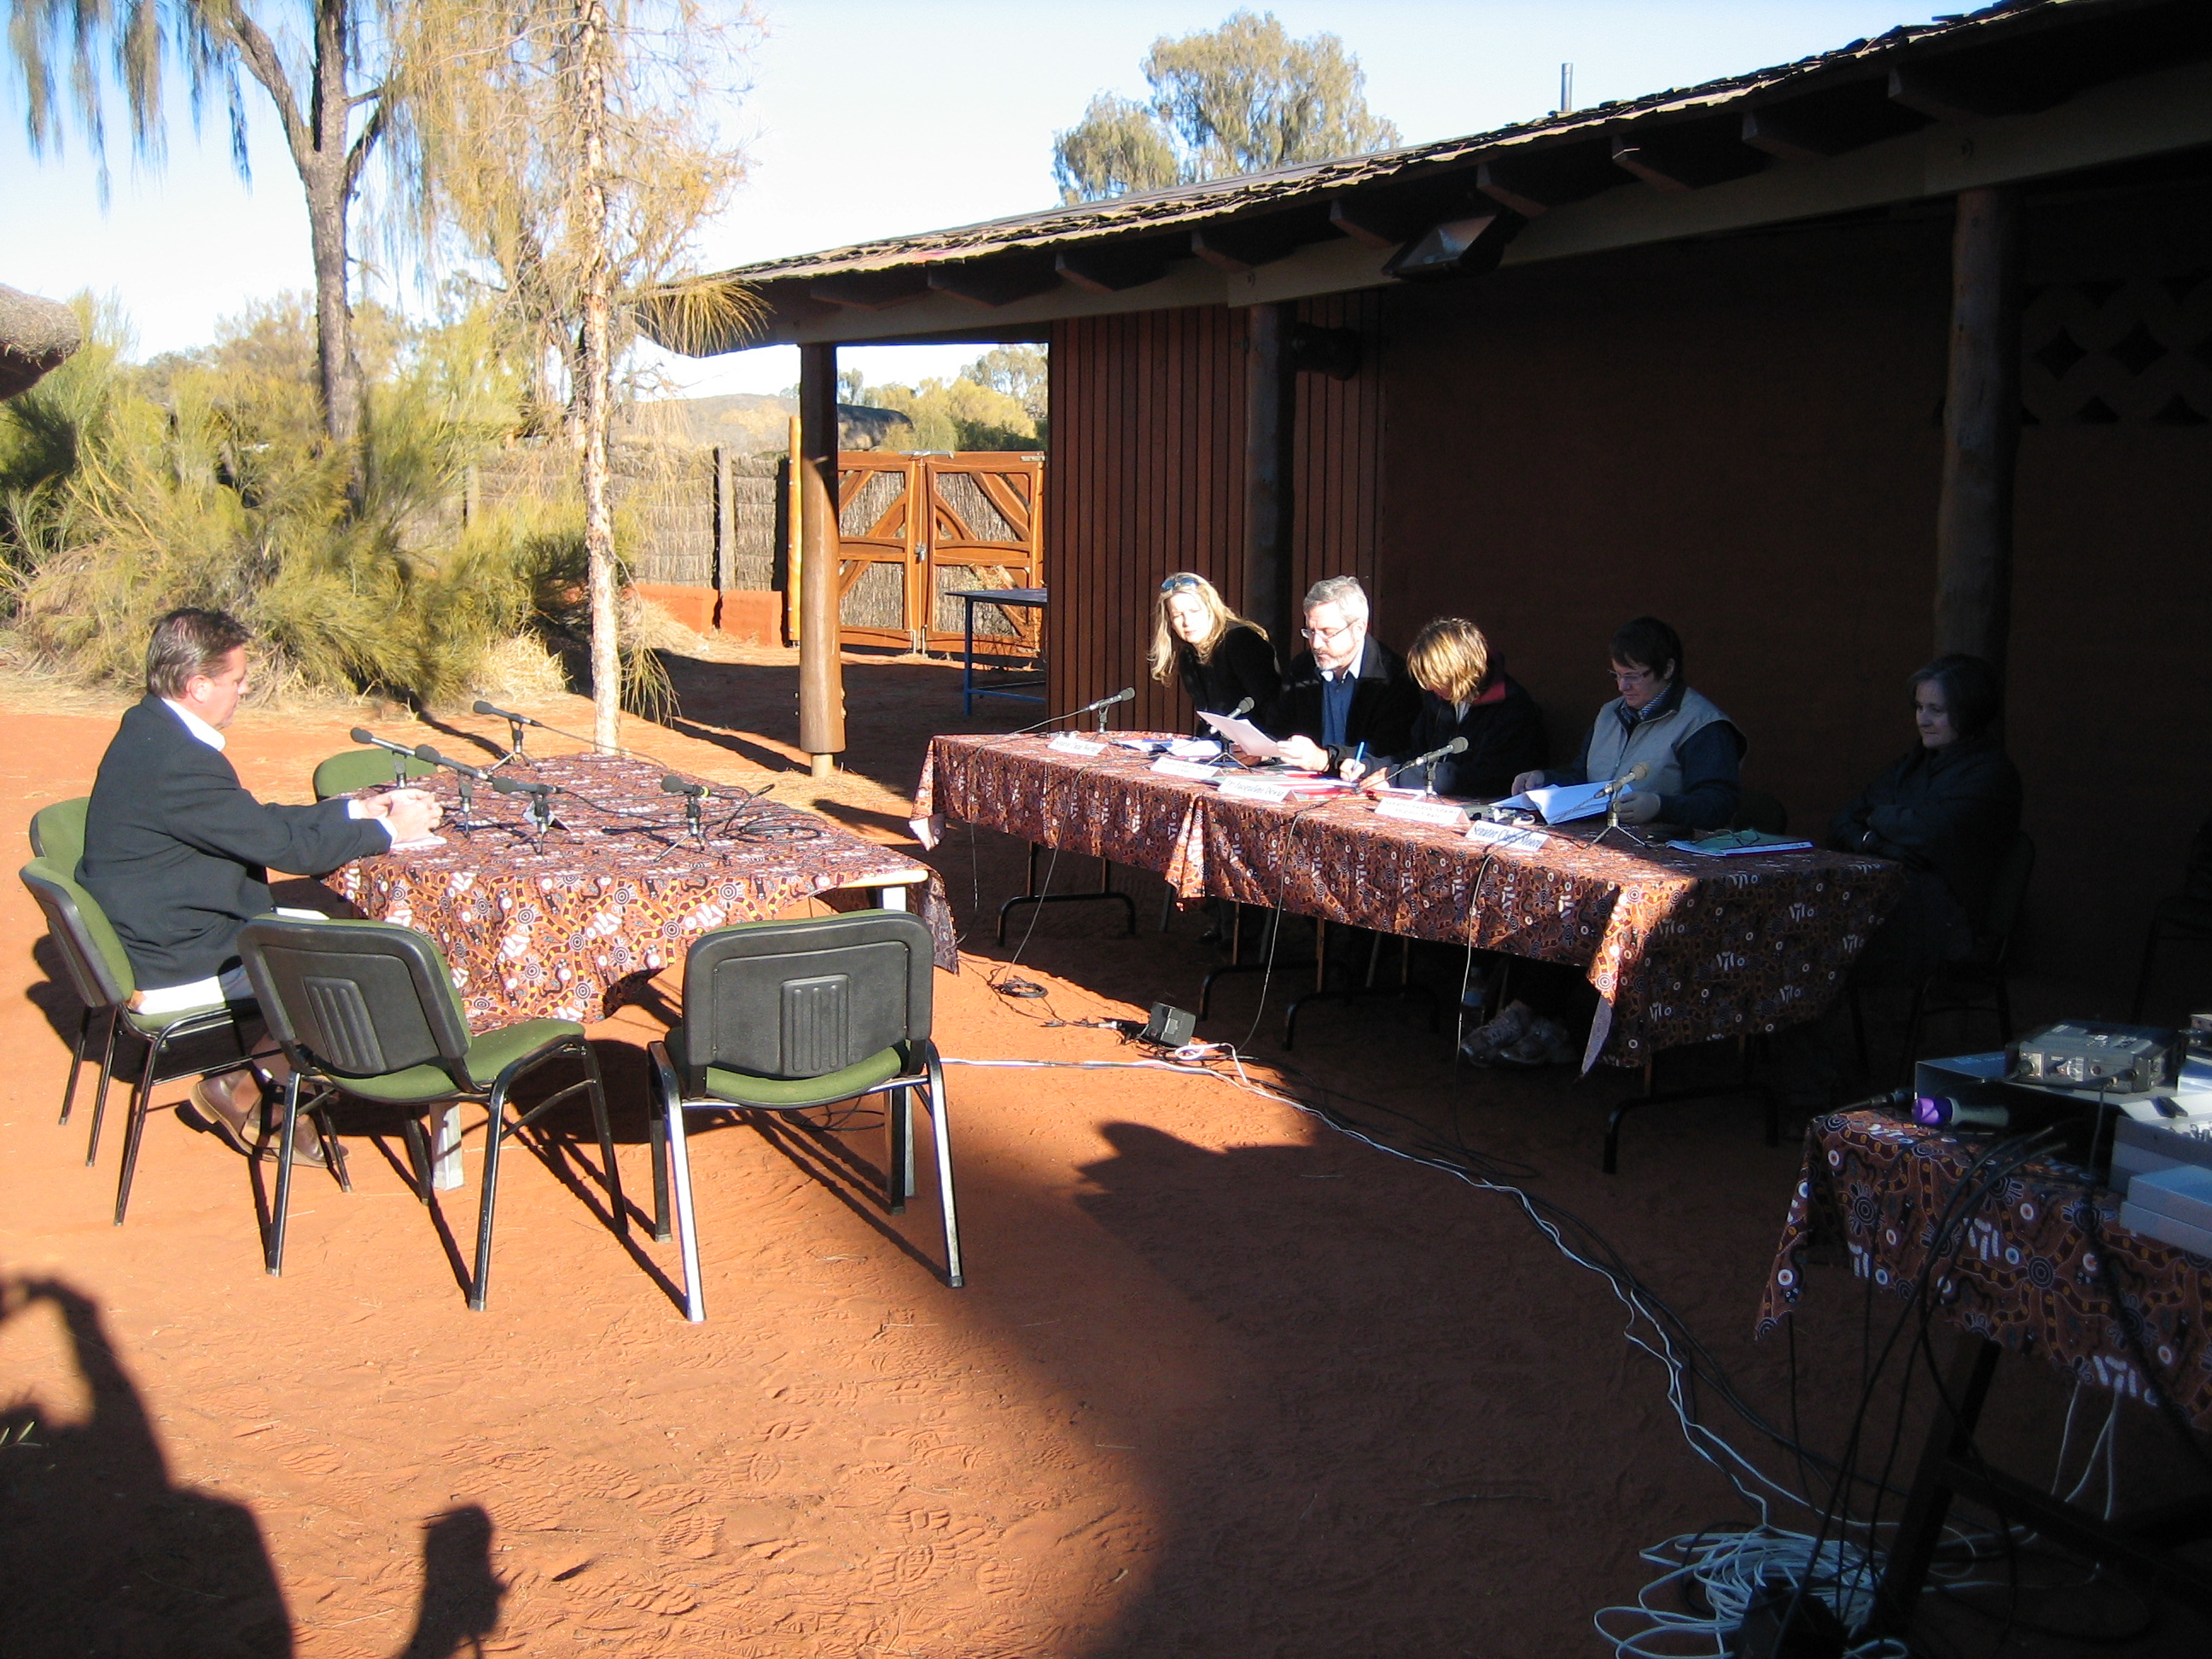 Committee members hearing evidence from Gareth Boyte, General Manager of Voyages Hotels and Resorts, 28 June 2006. Seated on right, L-R: Senators Dana Wortley and Andrew Bartlett [Chair], Dr Jacqueline Dewar [Acting Secretary], Senators Judith Adams [Deputy Chair] and Claire Moore.